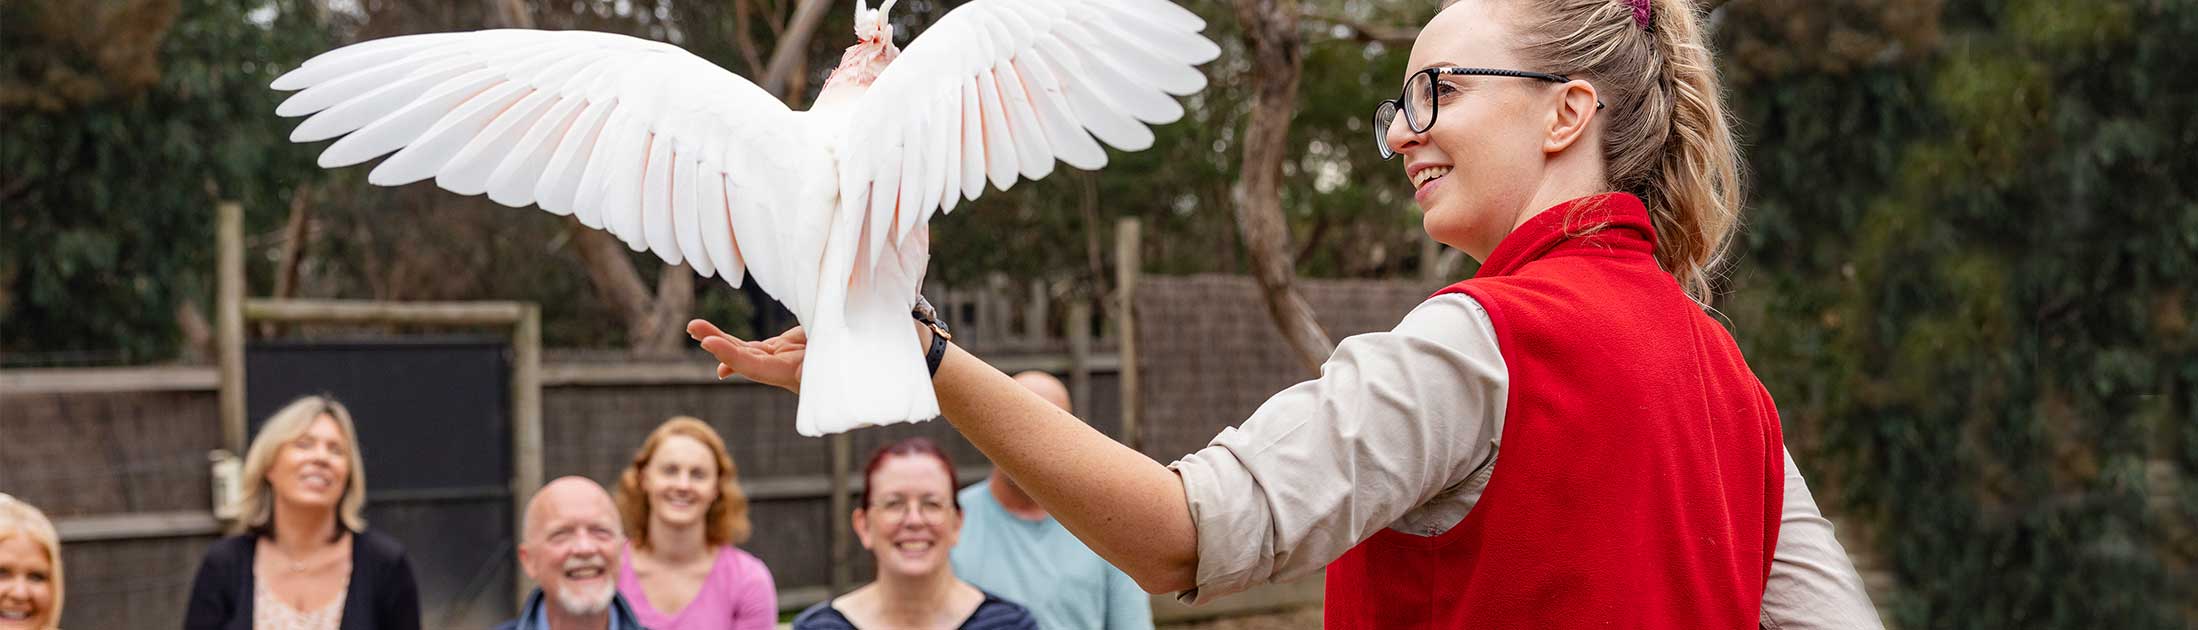 Moonlit Sanctuary Keeper showing visitors a Pink Cockatoo in the Conservation in Action Show.